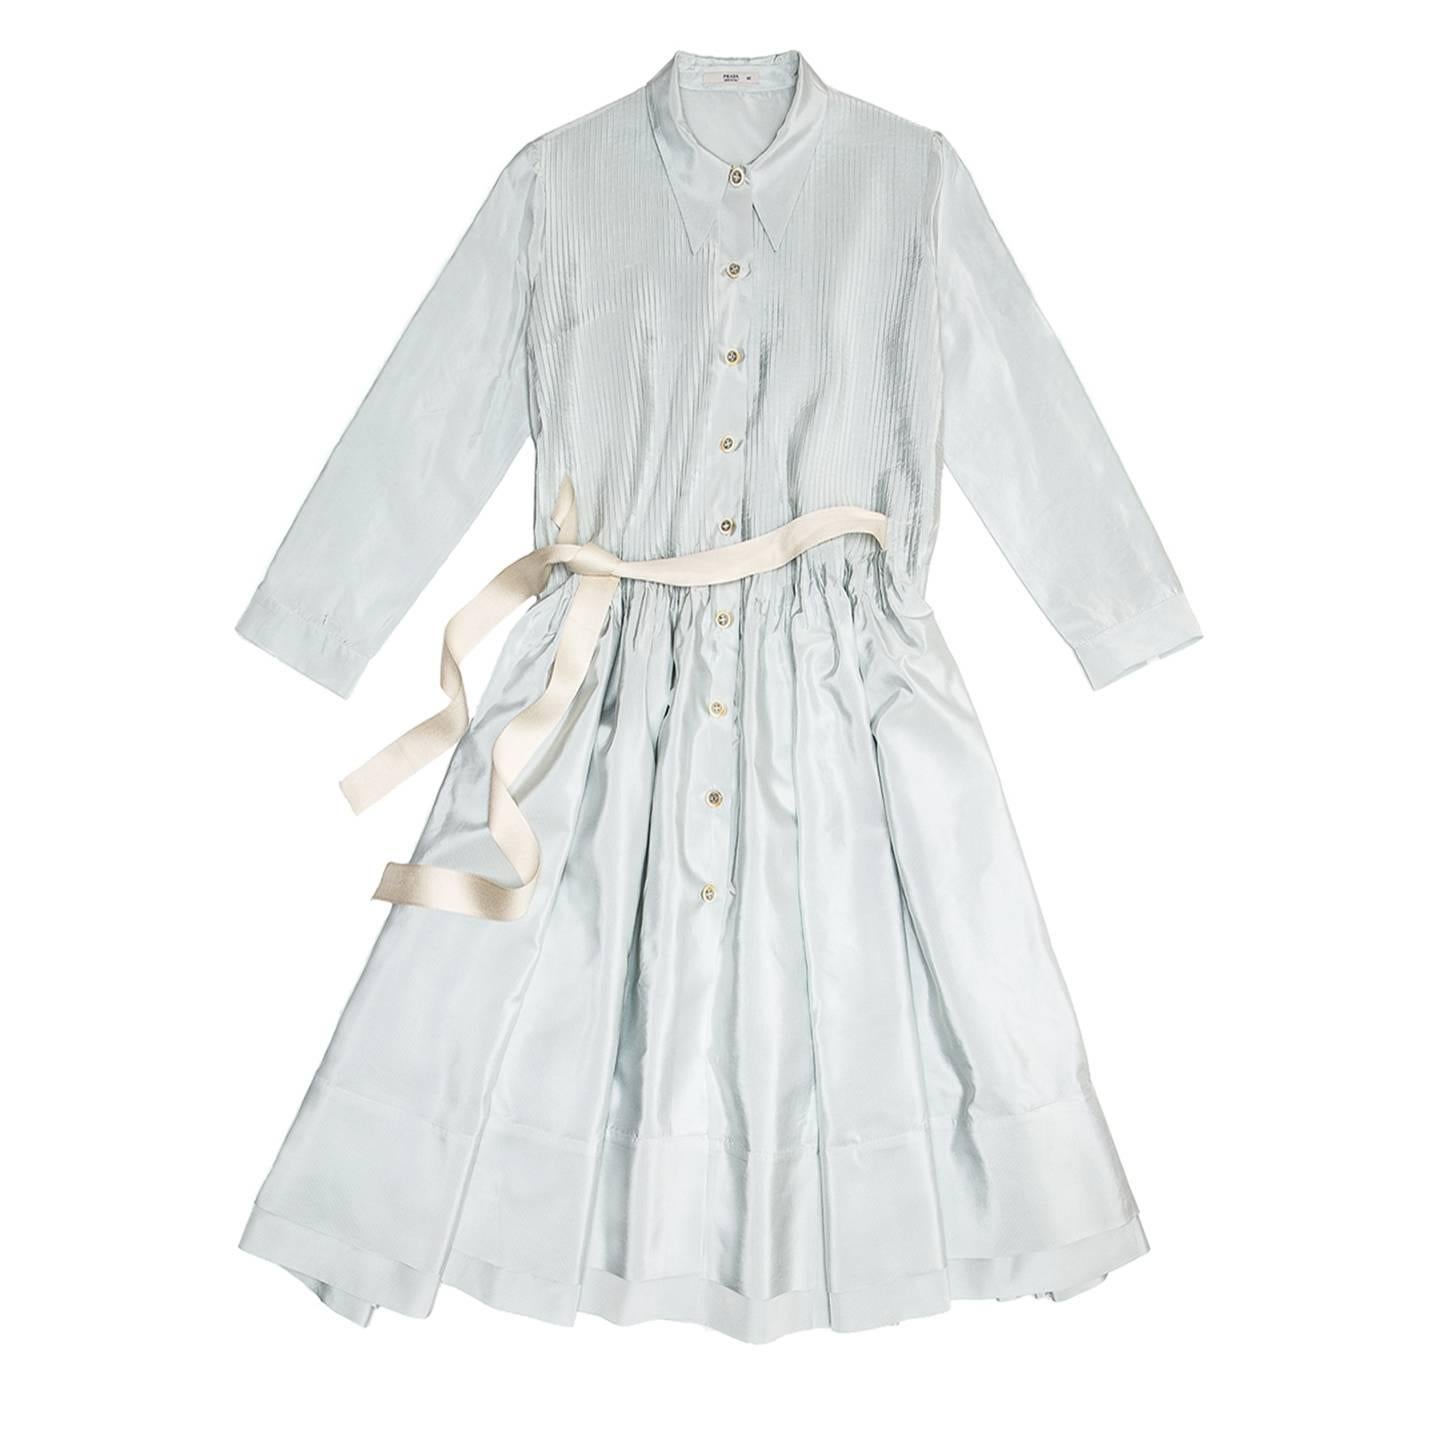 Light blue and ivory striped shiny silk shirt dress with fitted top and full skirt with below knee length. The shirt collar is long and pointed, the top part is enriched by little fixed pleats at front that open up at waistline creating volume for